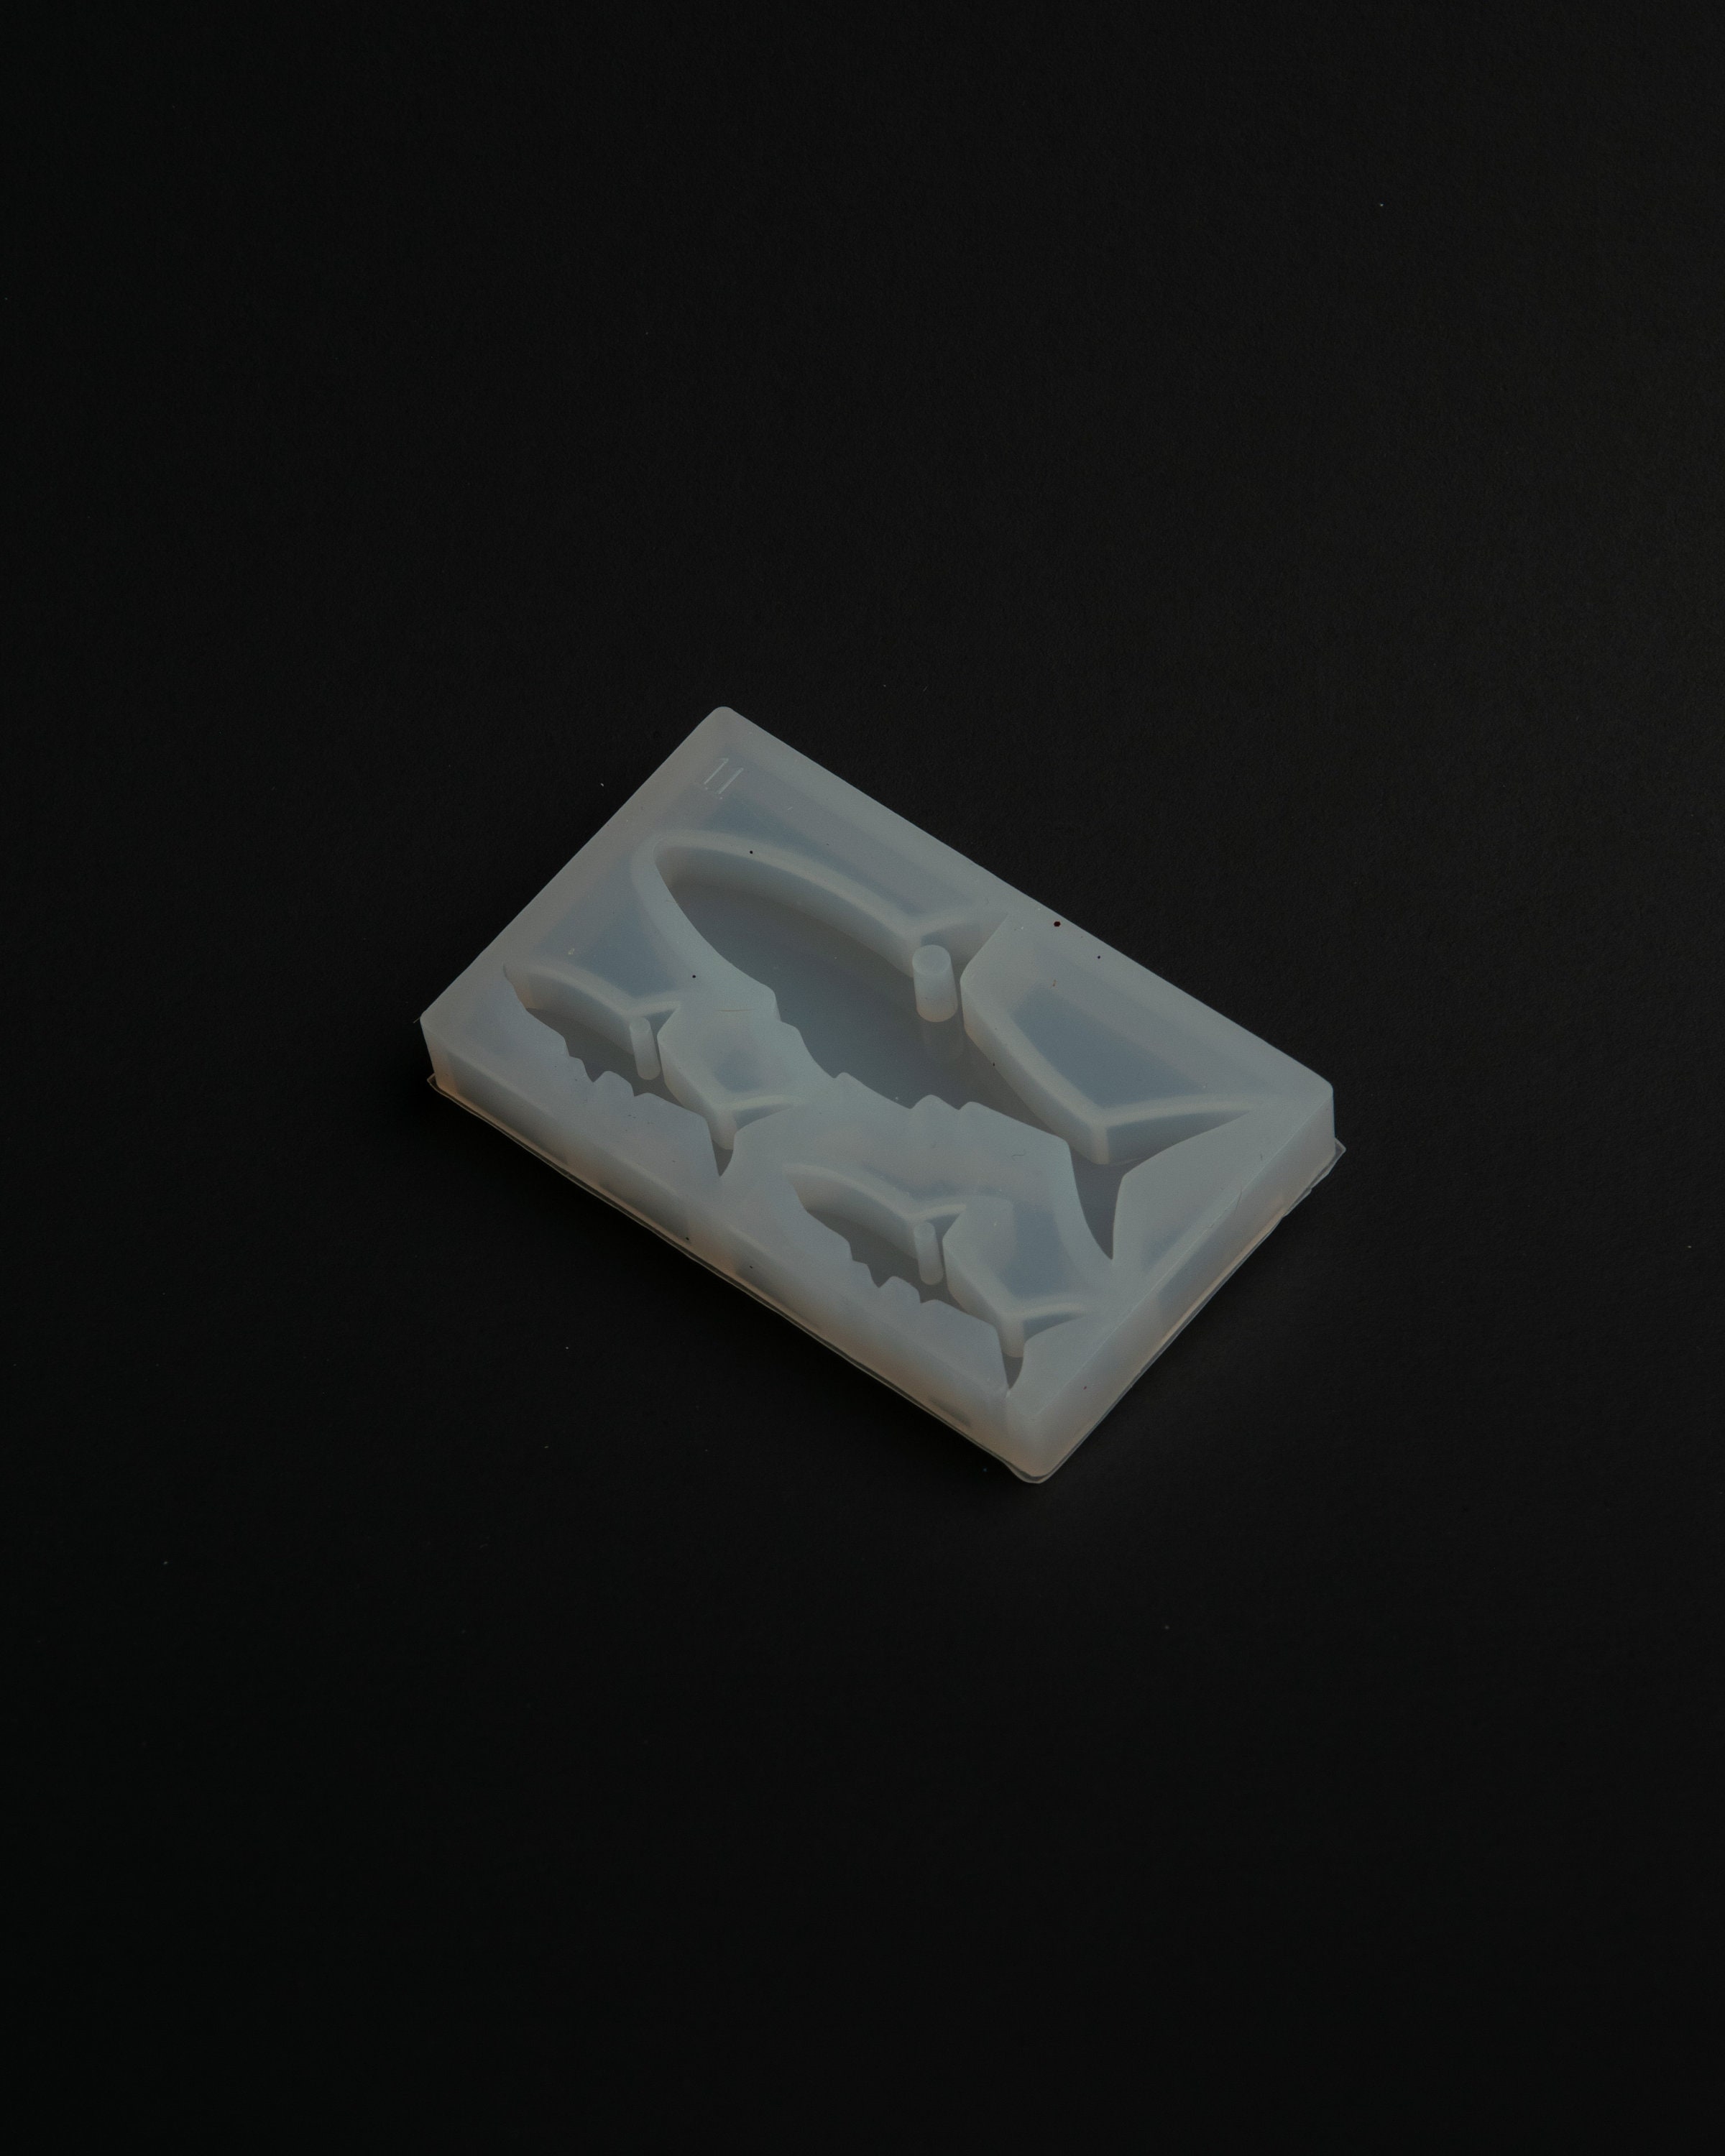 Silicone Molds For Gummies Baby Shark Candy Mould Under The Sea Ice Cube  Tray Marine Life